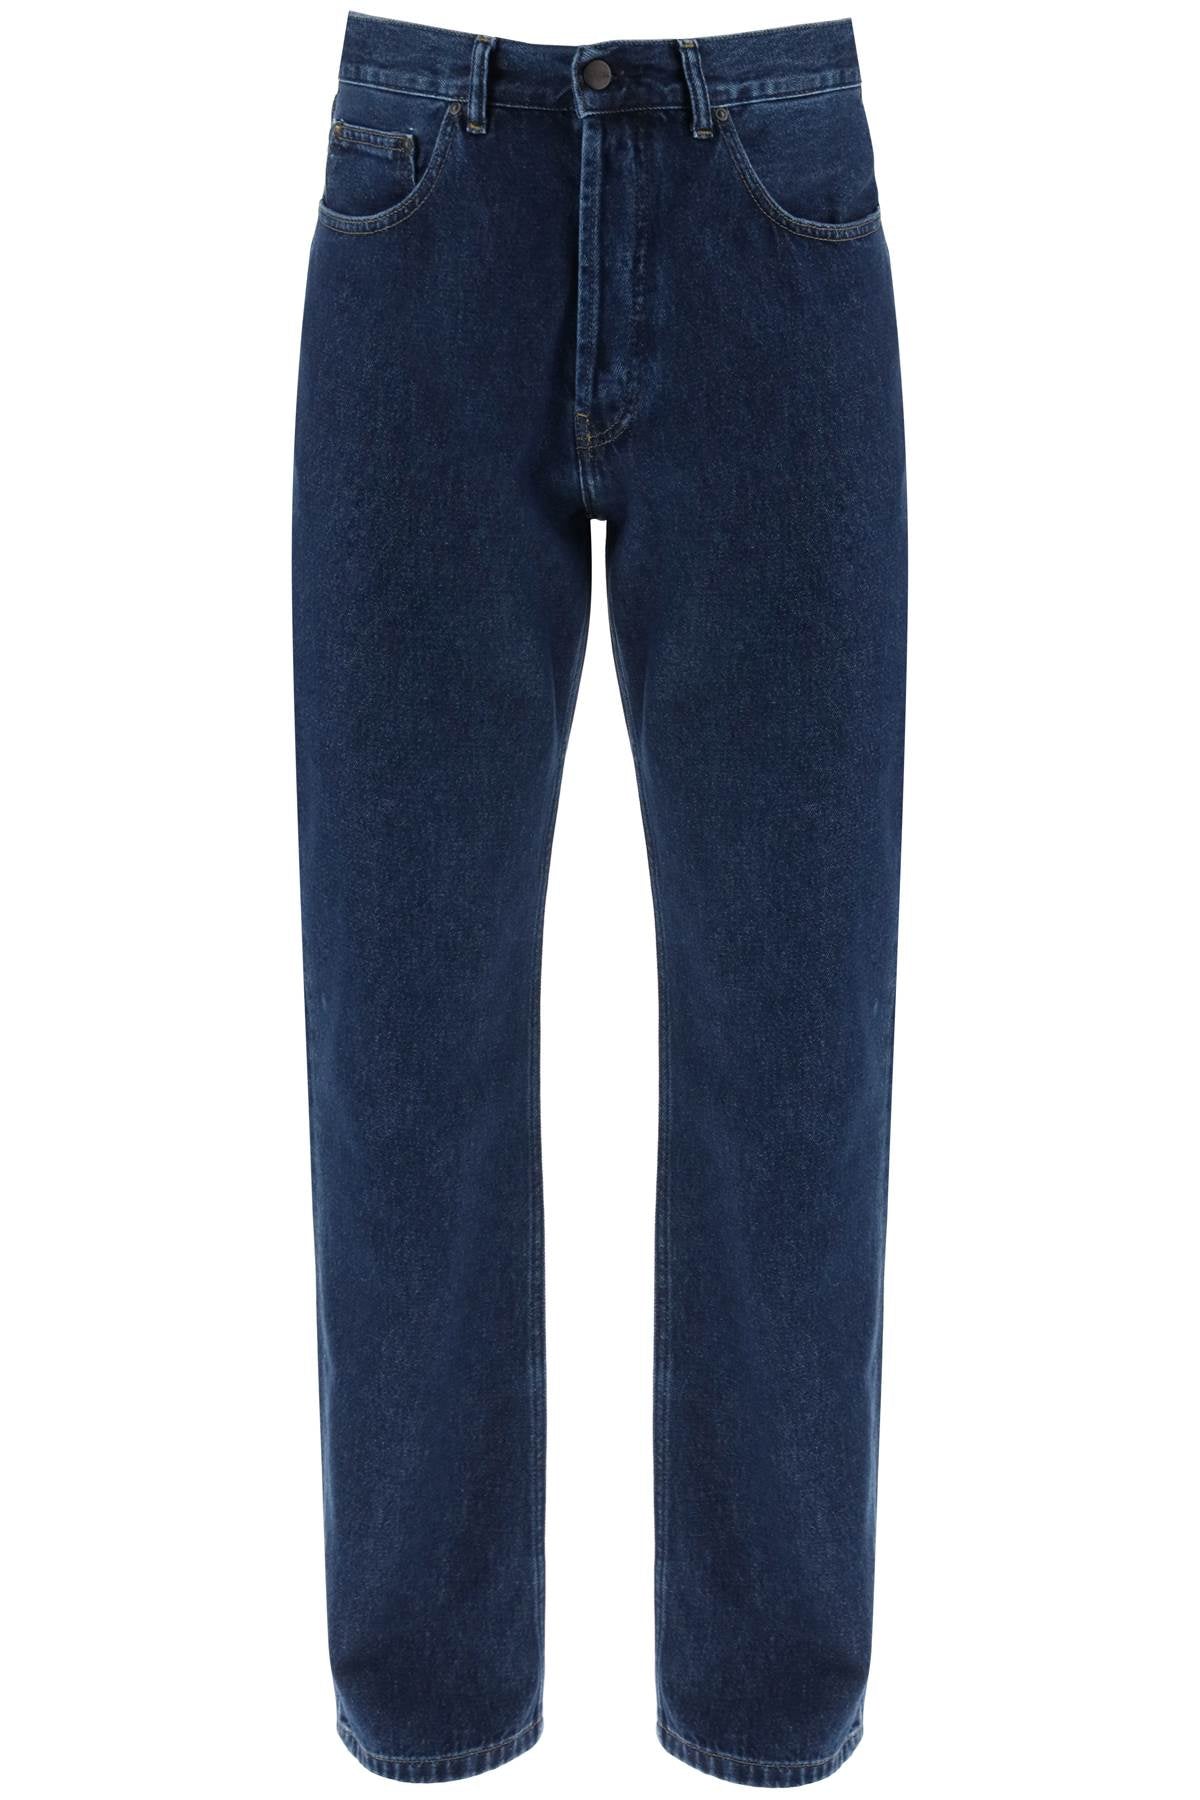 Carhartt wip nolan relaxed fit jeans-0